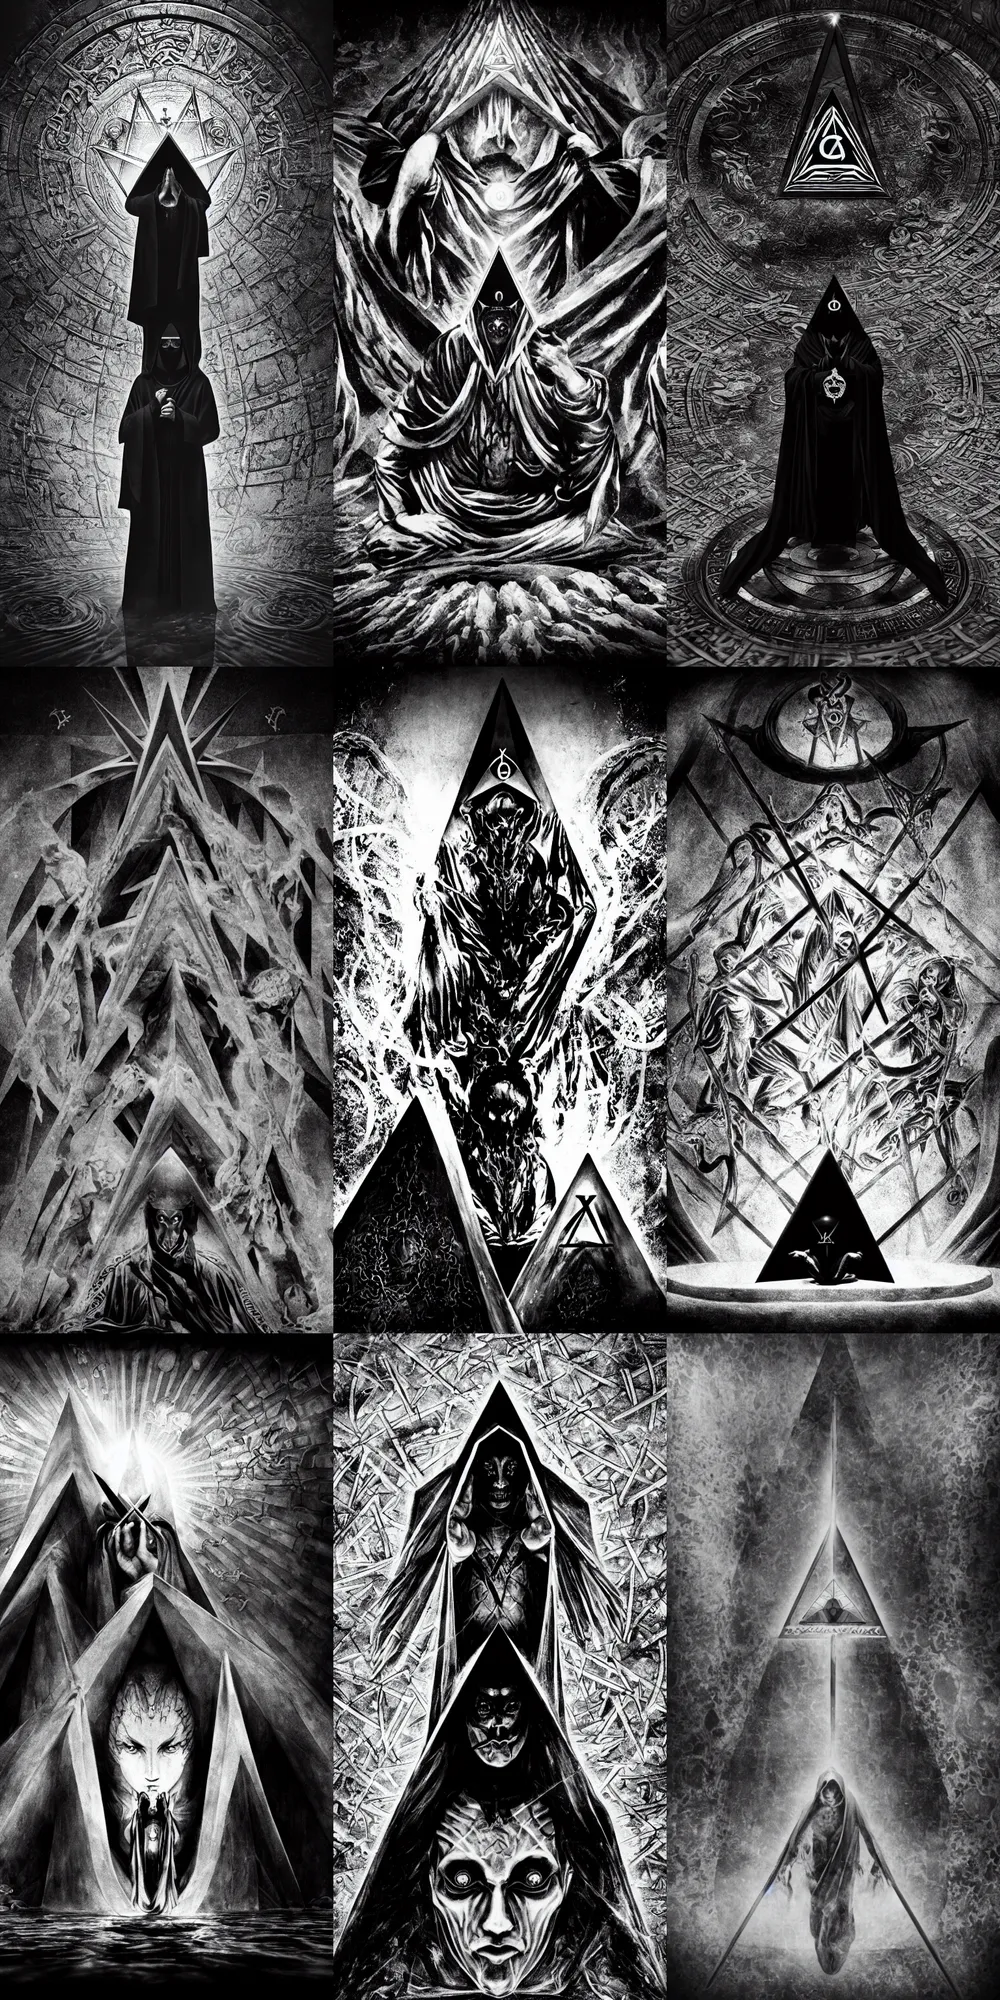 Prompt: Demonic masonic style occult hyperrealism cinematic dark magus style seinen manga film still inspired by occult alchemy(1920), submerged temple ritual scene, extreme closeup portrait of hooded cult master consuming regalia for infinite disciples, half submerged in heavy sand, tilt shift zaha hadid designed babylonian temple background, Panavision X III , 8K, 35mm lens, three point perspective, chiaroscuro, highly detailed, golden ratio composition